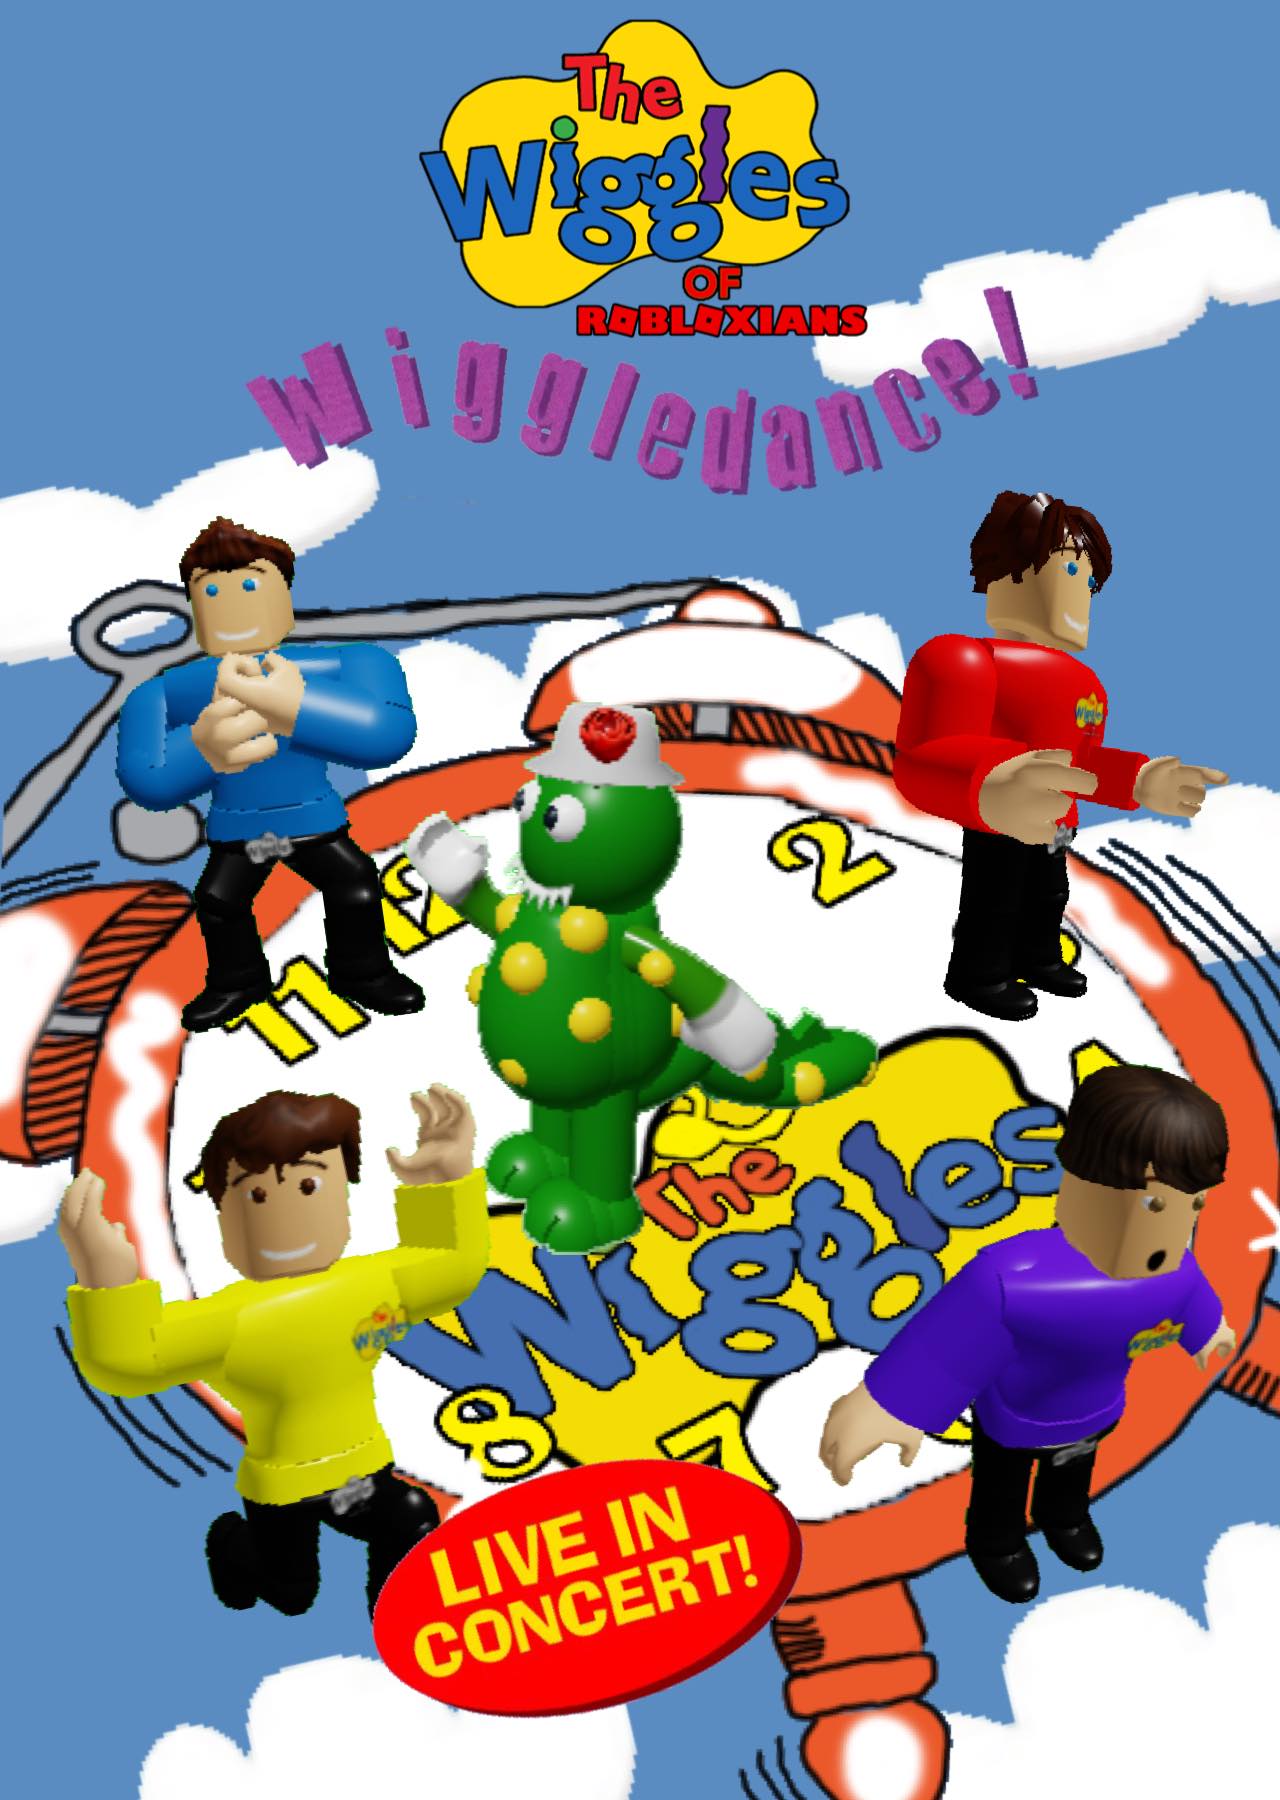 The Roblox Wiggles' Big Ballet Day! 2